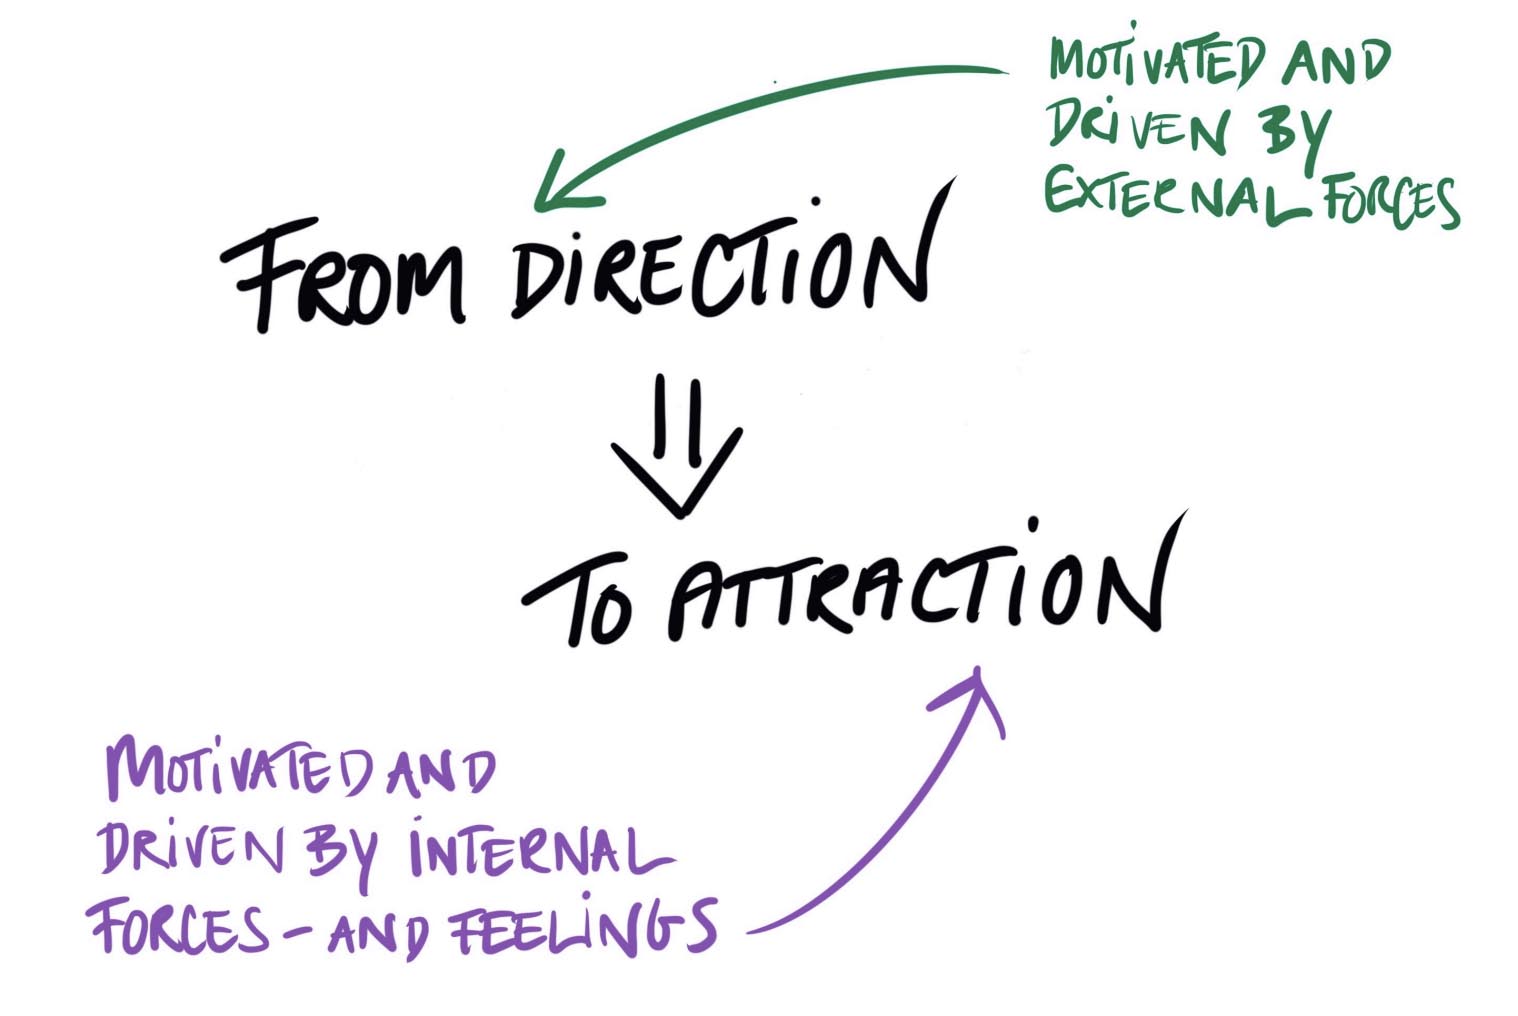 From Setting Direction to Creating Attraction